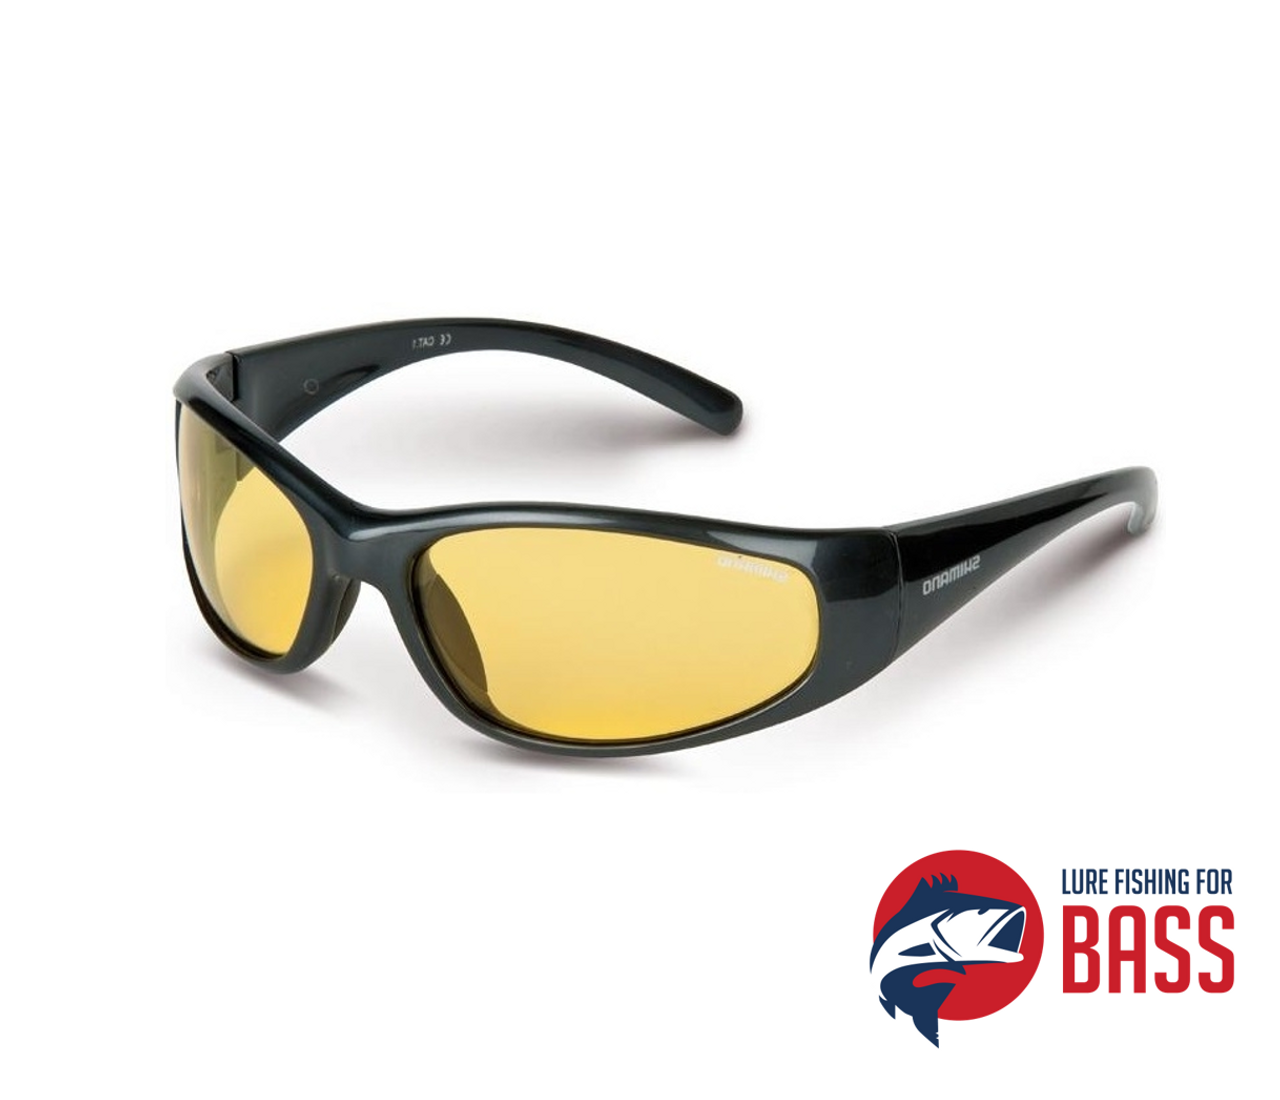 https://cdn11.bigcommerce.com/s-h9hha4a/images/stencil/1280x1280/products/6317/21706/Shimano_Polarized_Sunglasses_Curado__74891.1625909374.png?c=2